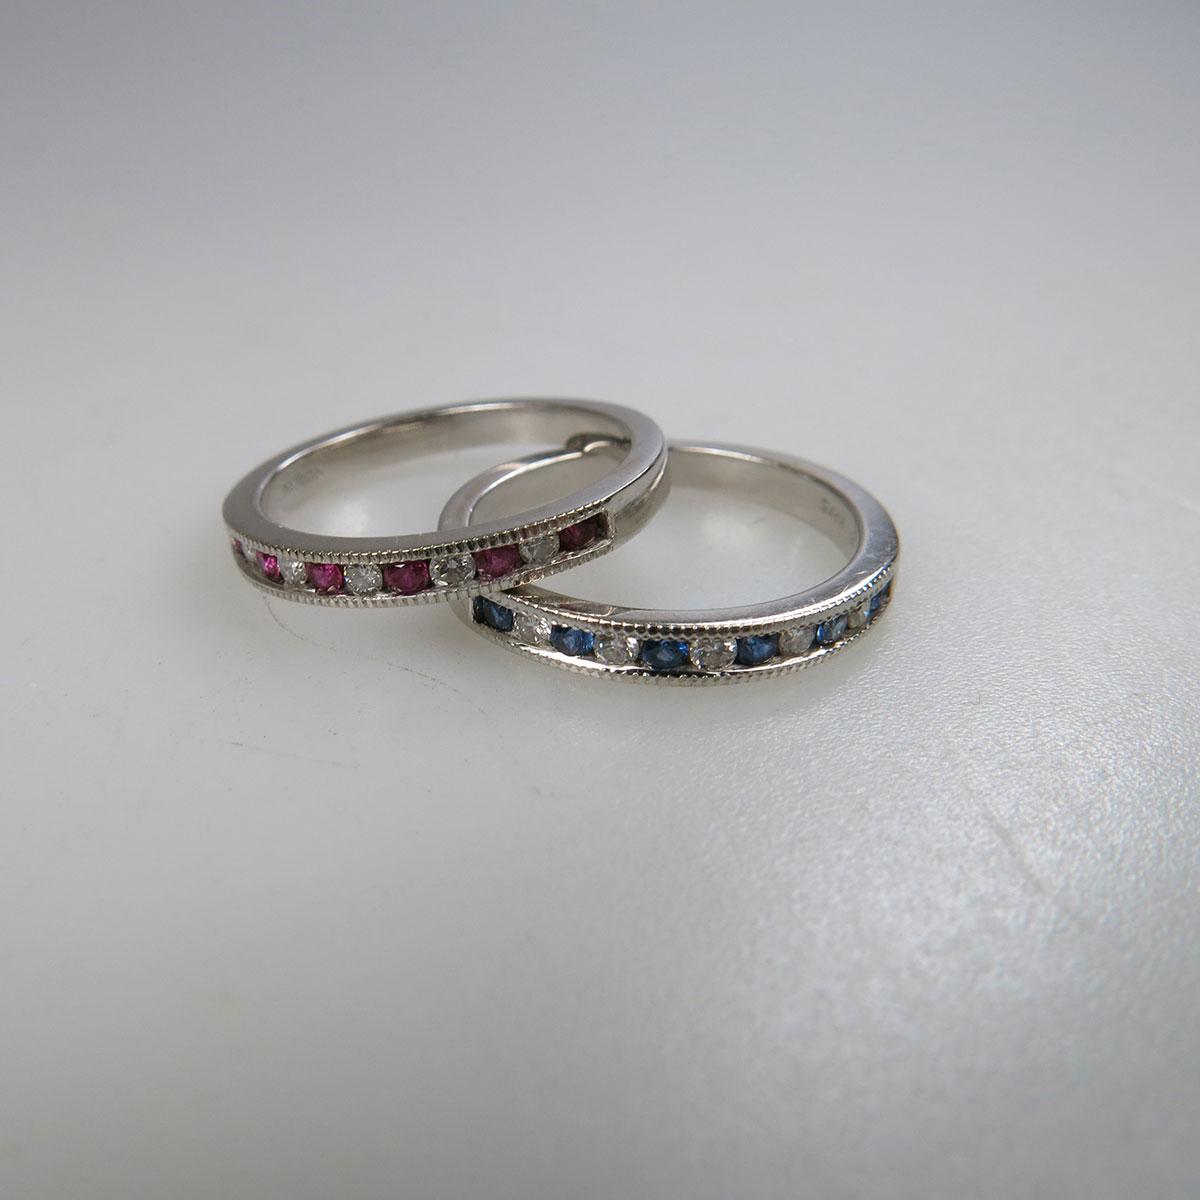 Two Birks 18k White Gold Bands